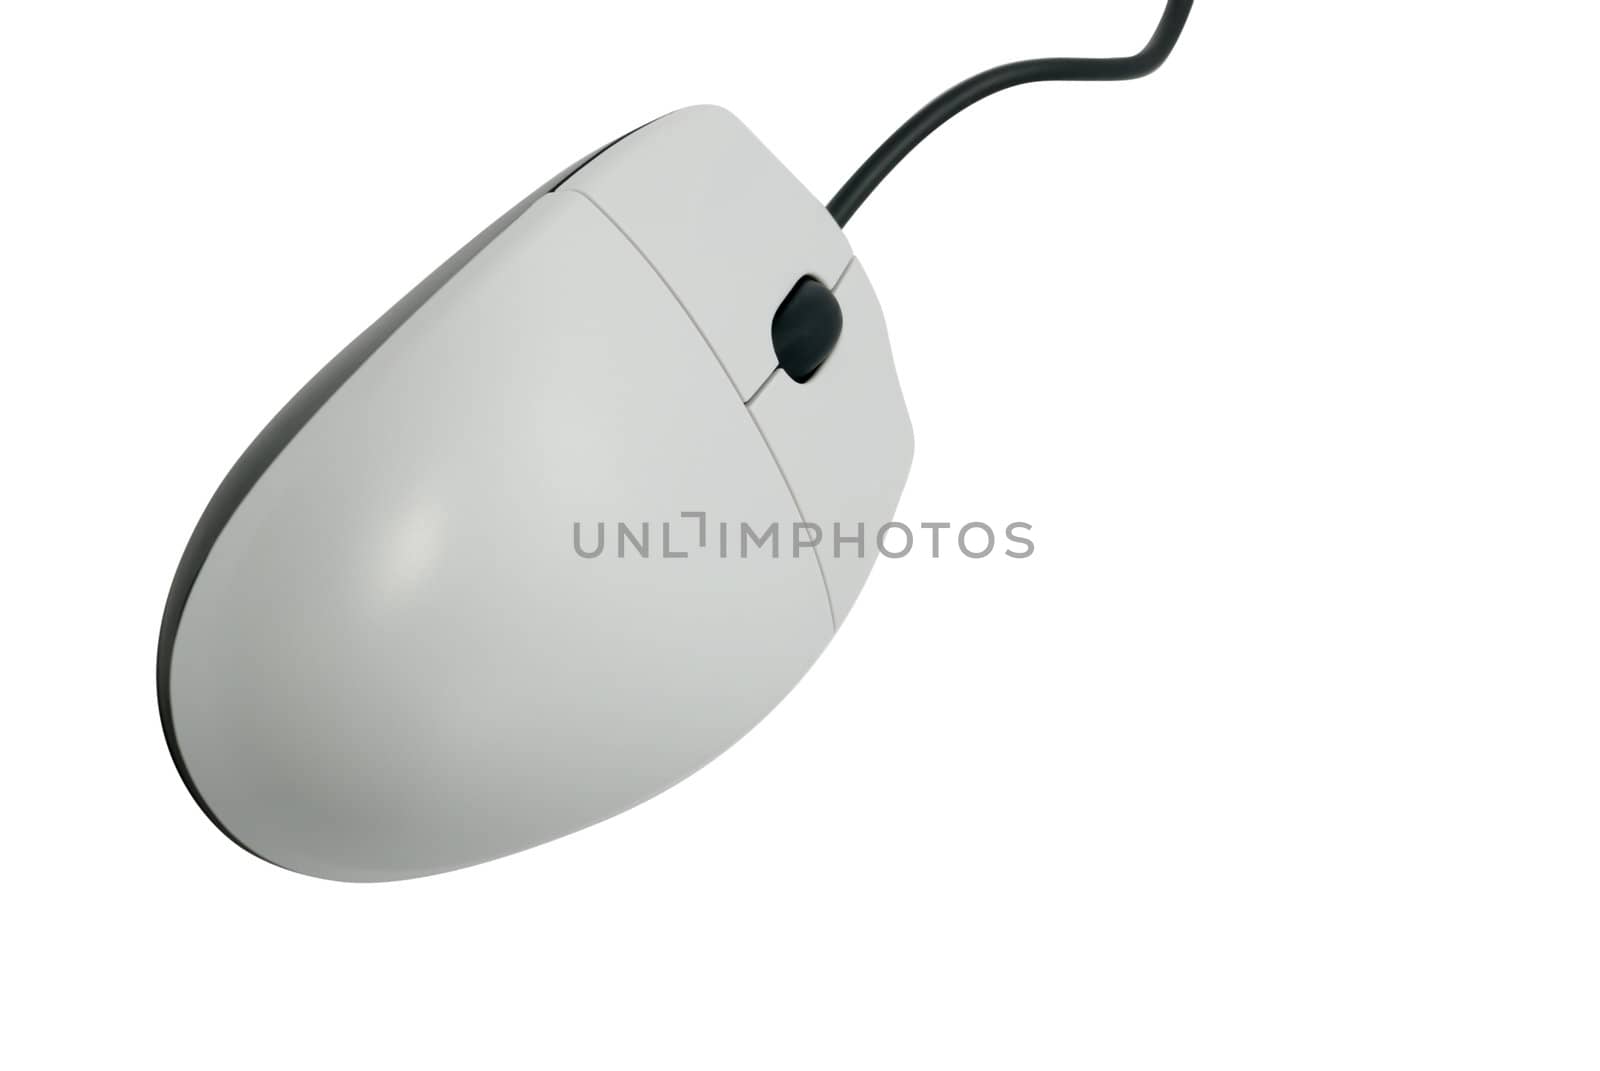 The computer mouse. The manipulator for management of the cursor on a computer